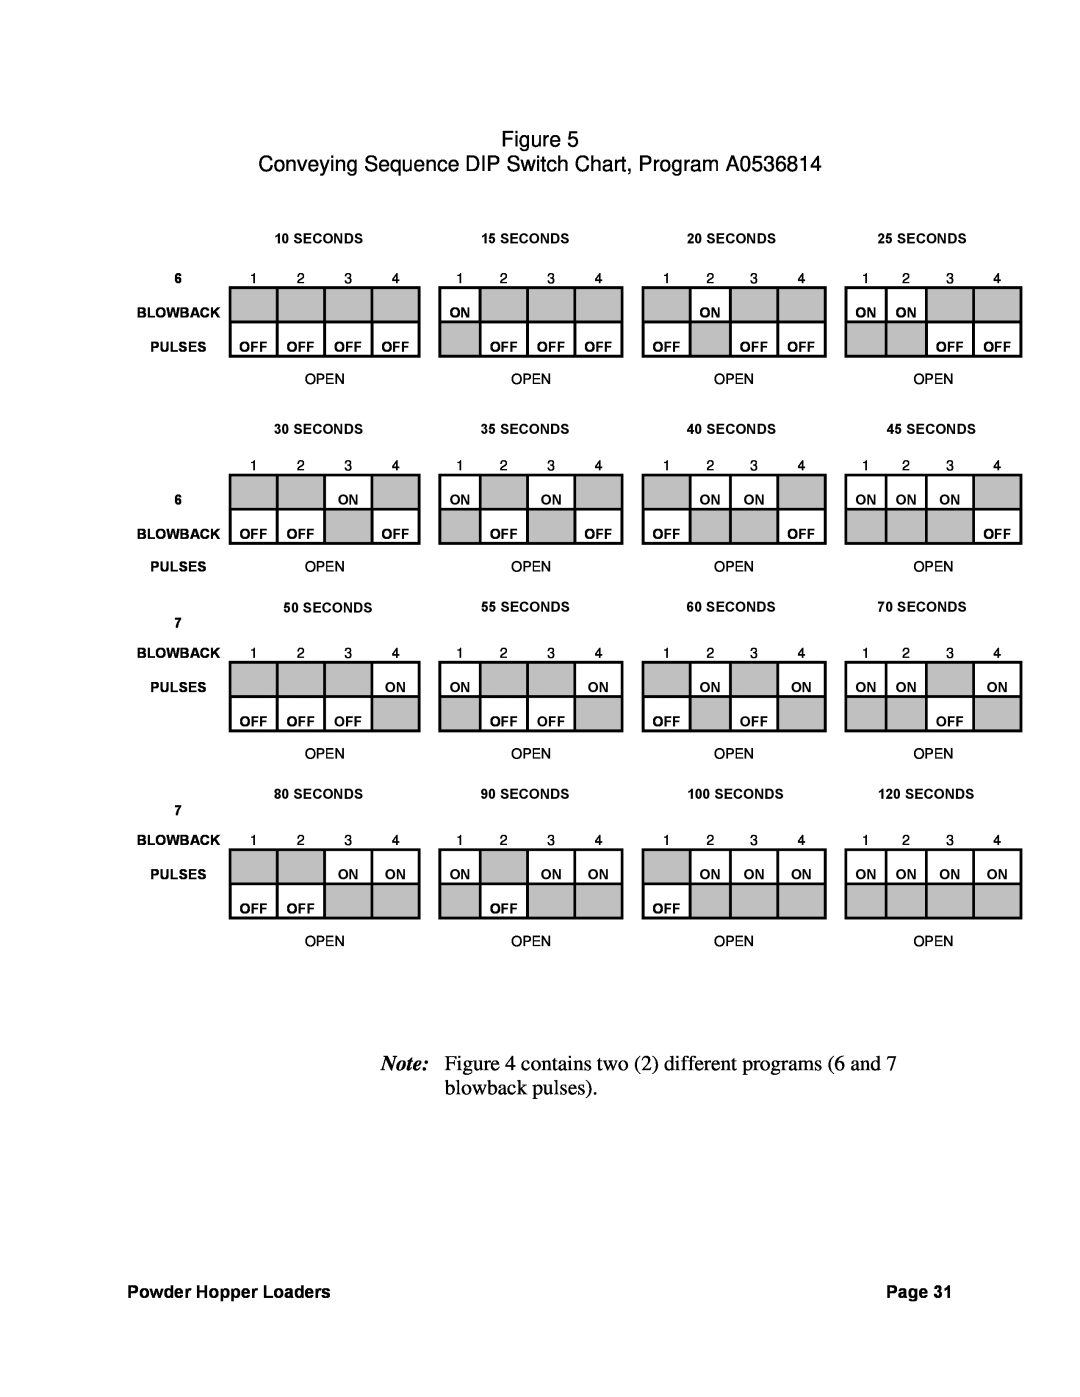 Sterling 882, 238 manual Conveying Sequence DIP Switch Chart, Program A0536814, Page 